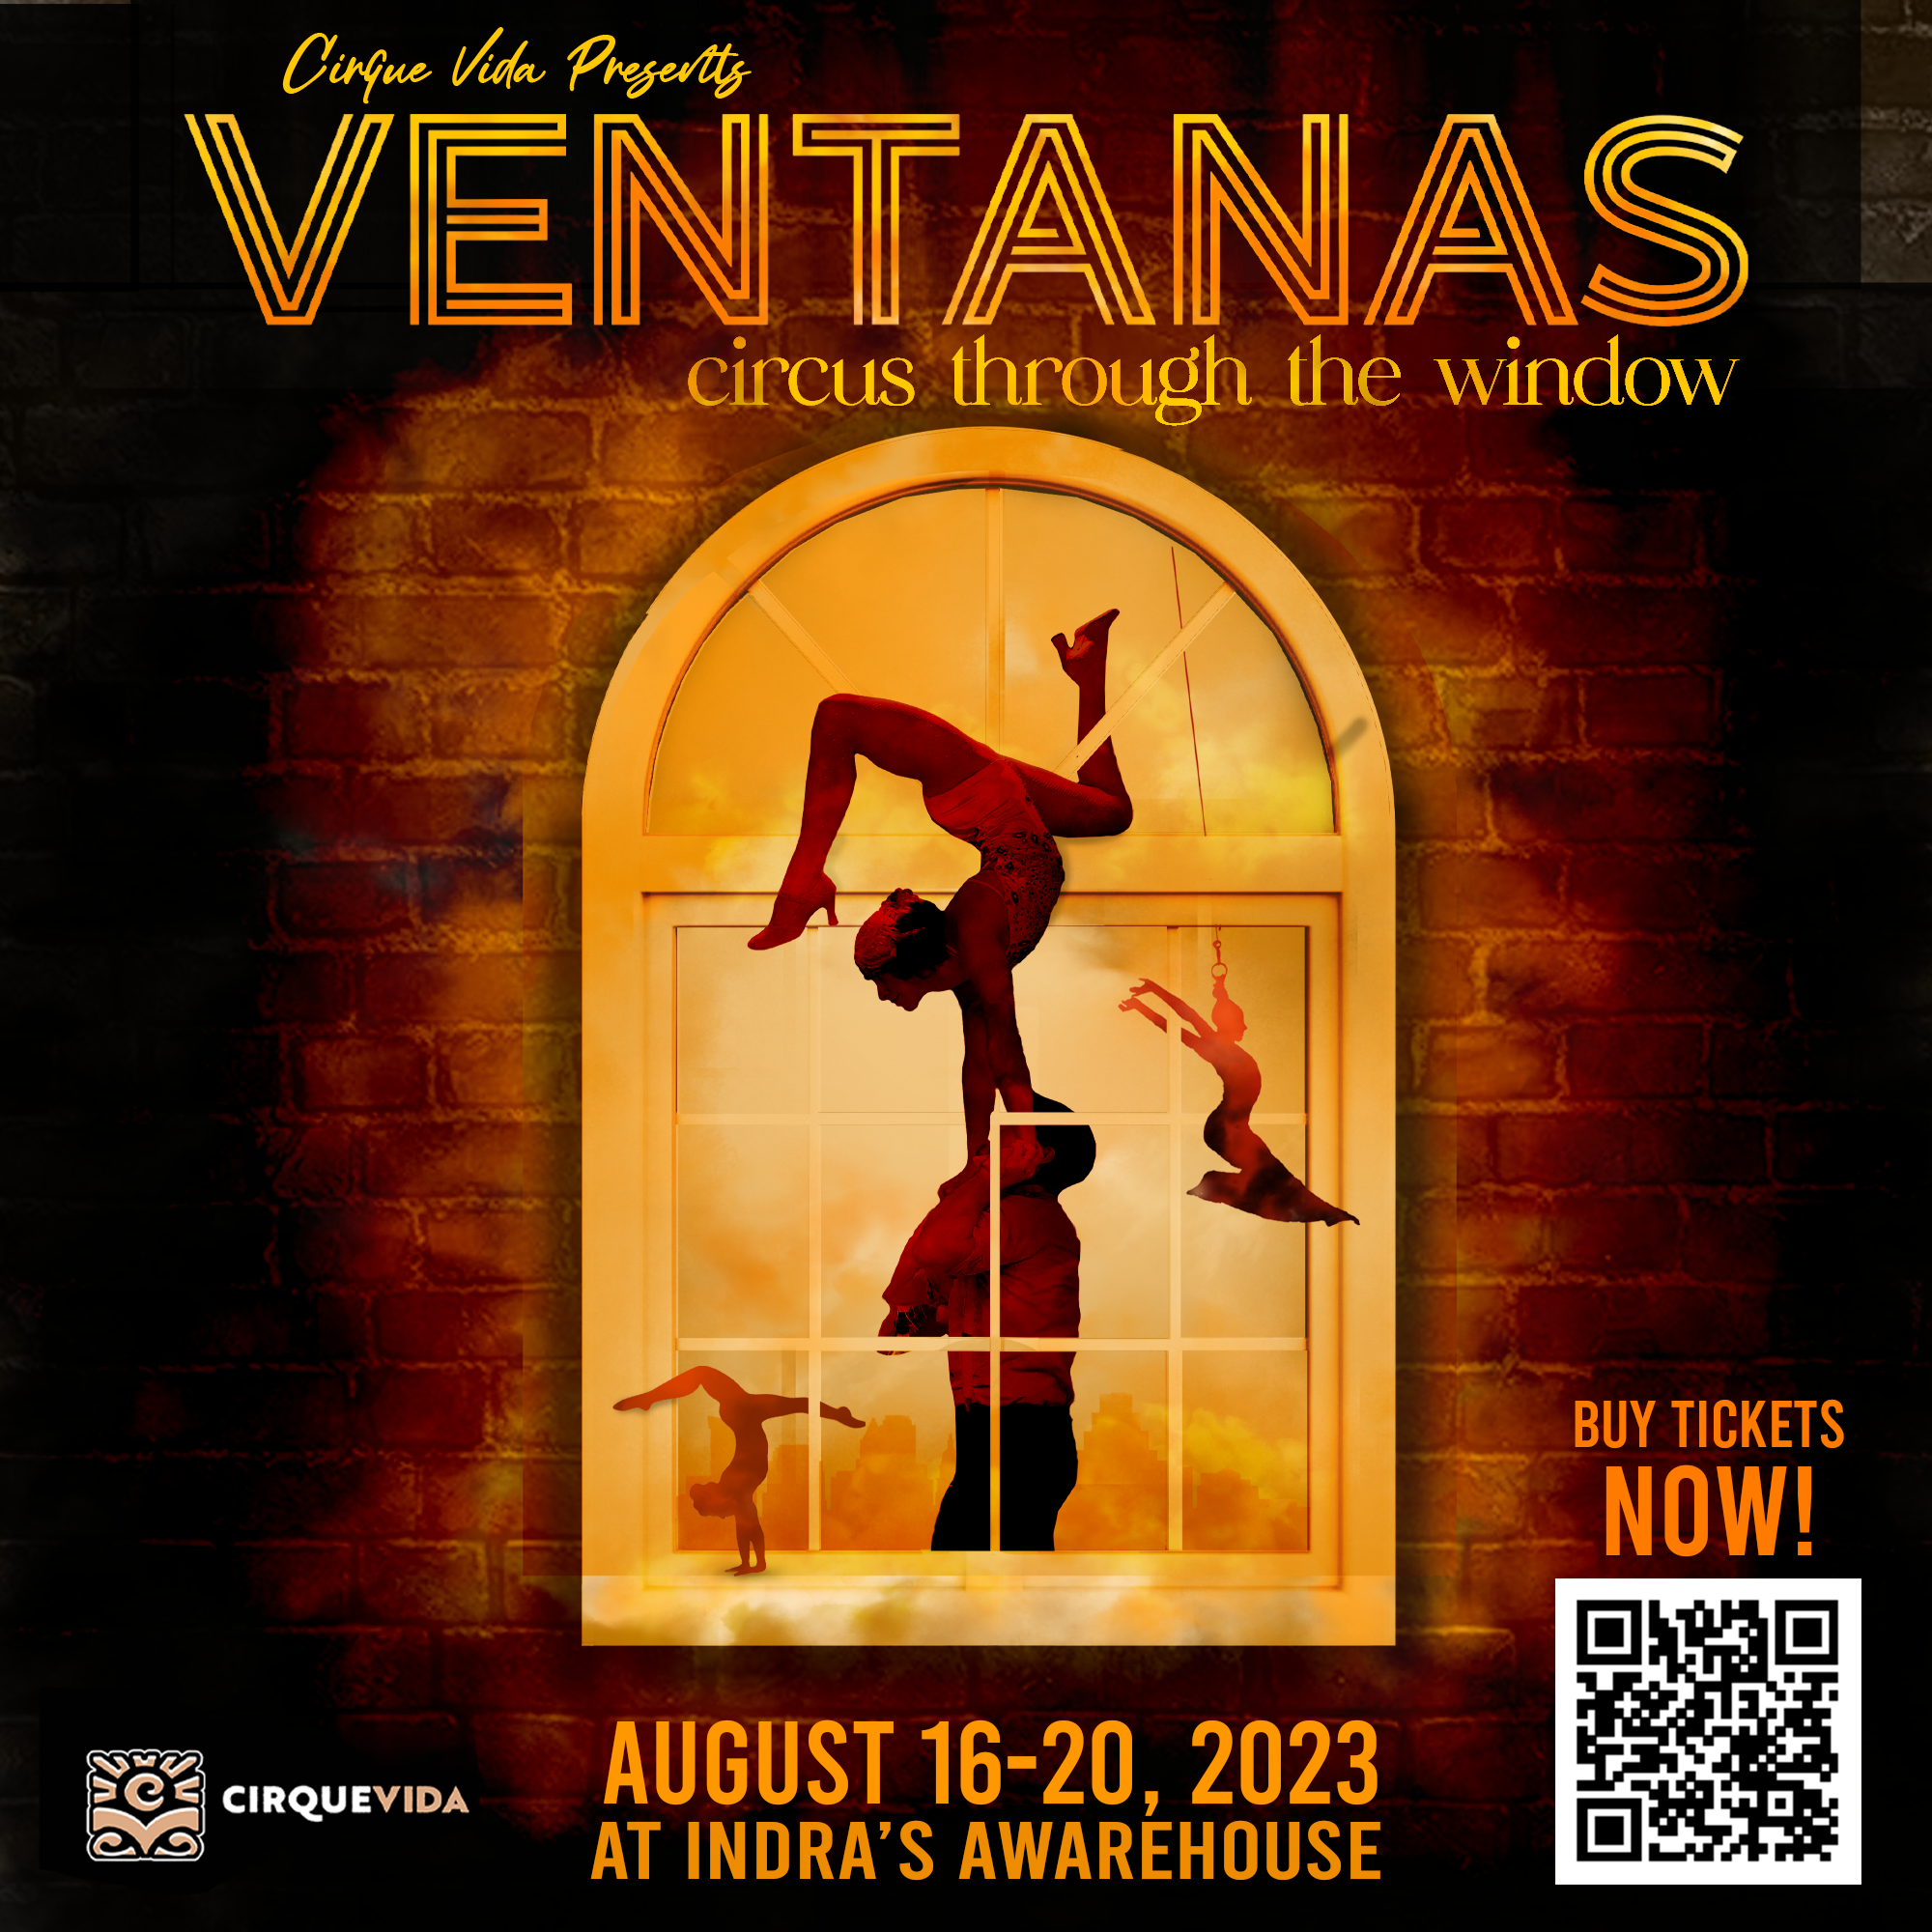 The Ventanas project image.